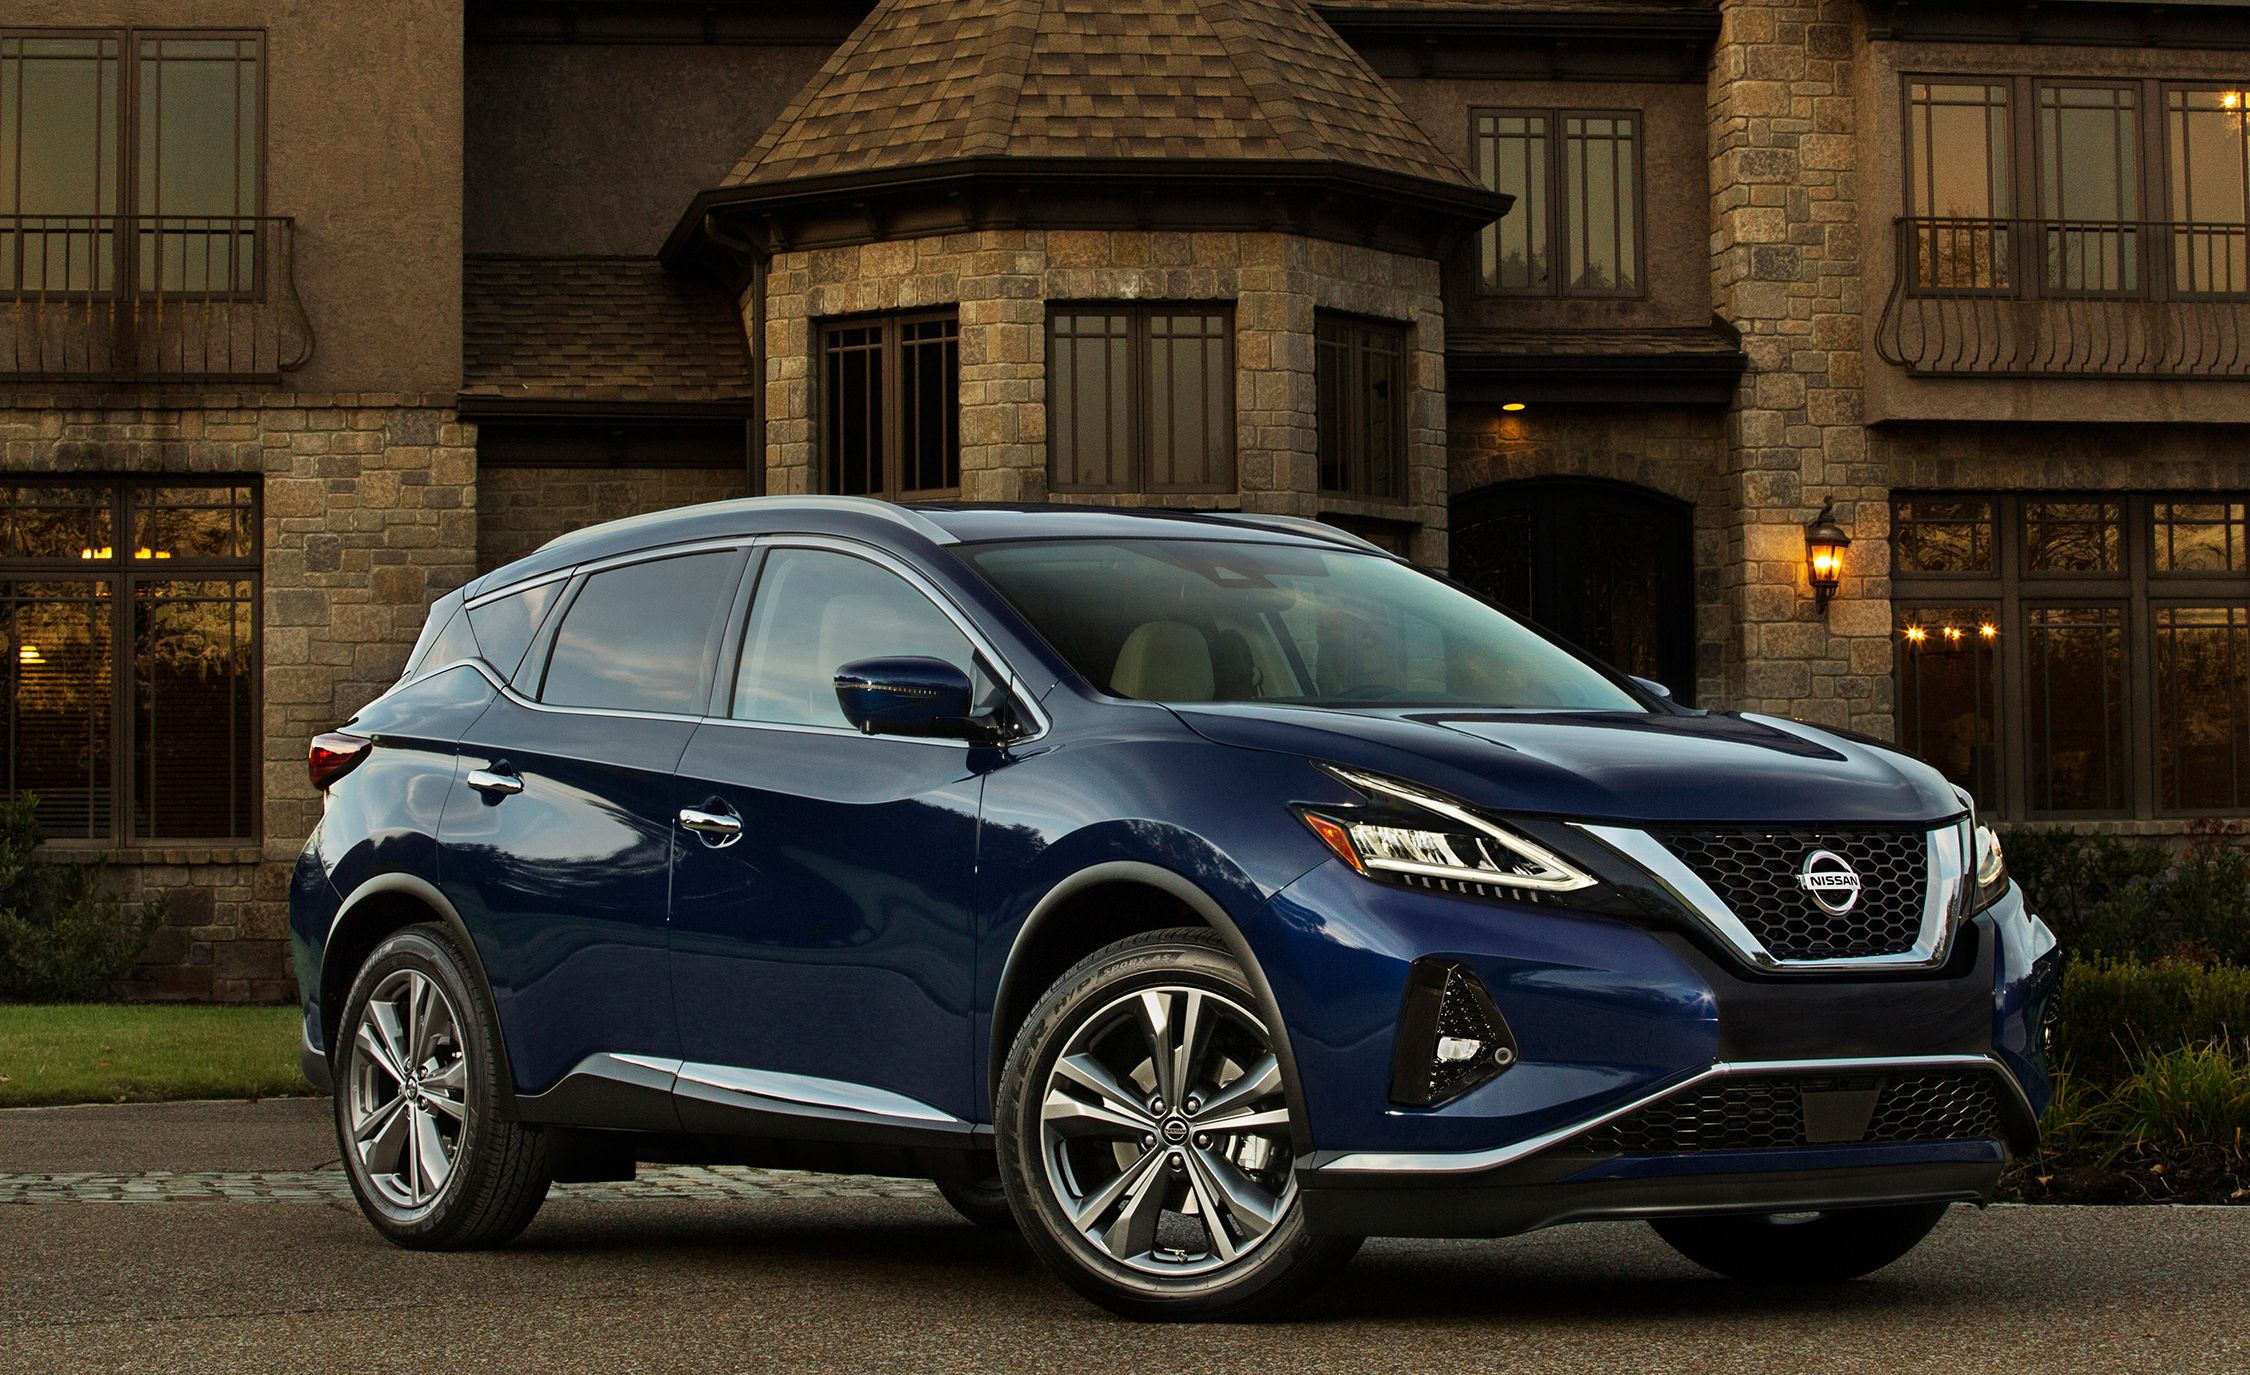 2019 Nissan Murano Becomes More Semi-Luxurious - Details, Specs